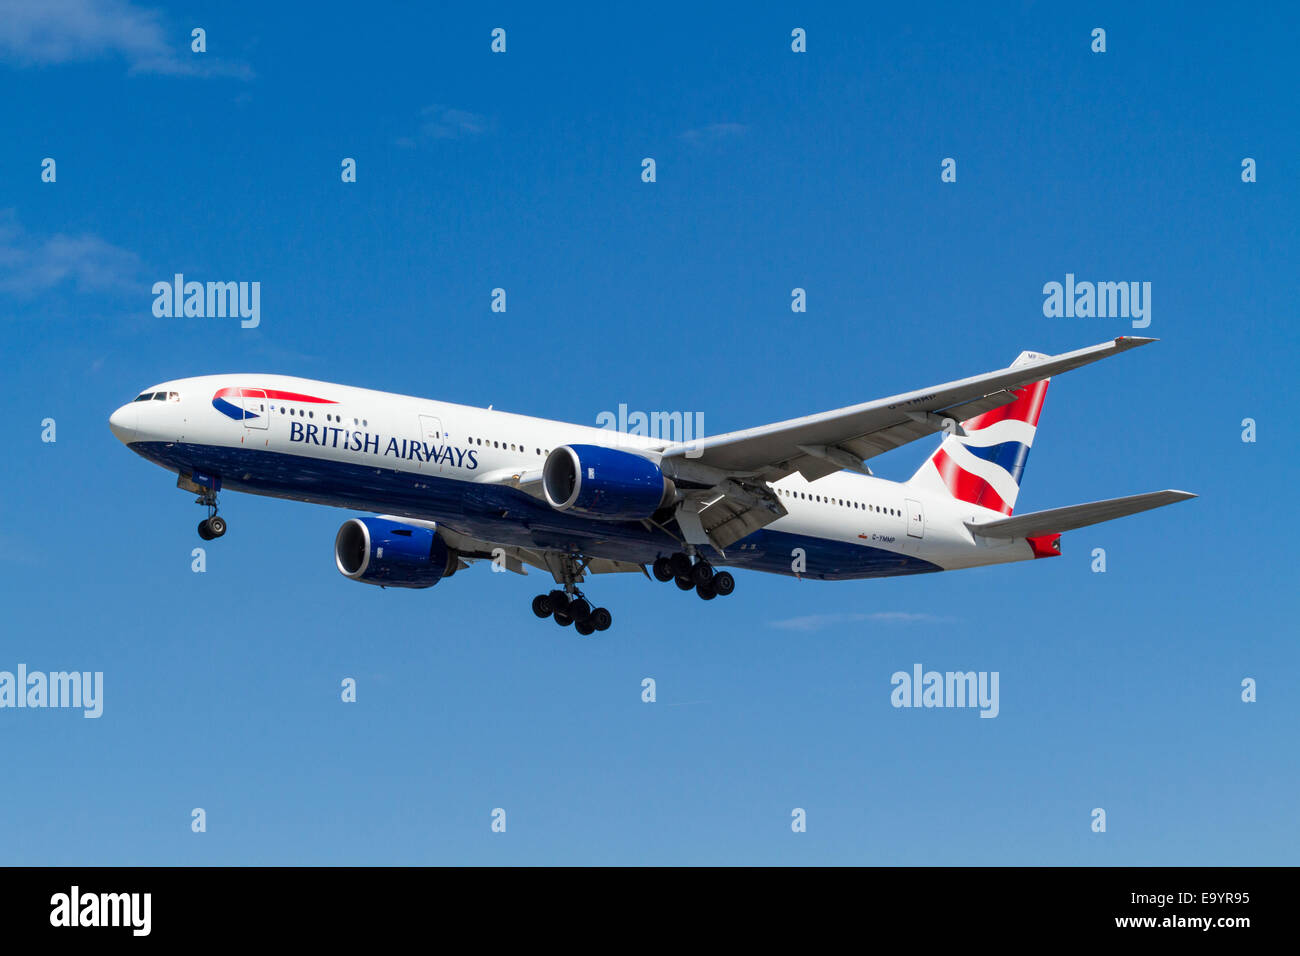 British Airways Boeing 777 plane, G-YMMP, on its approach for landing at London Heathrow, England, UK Stock Photo